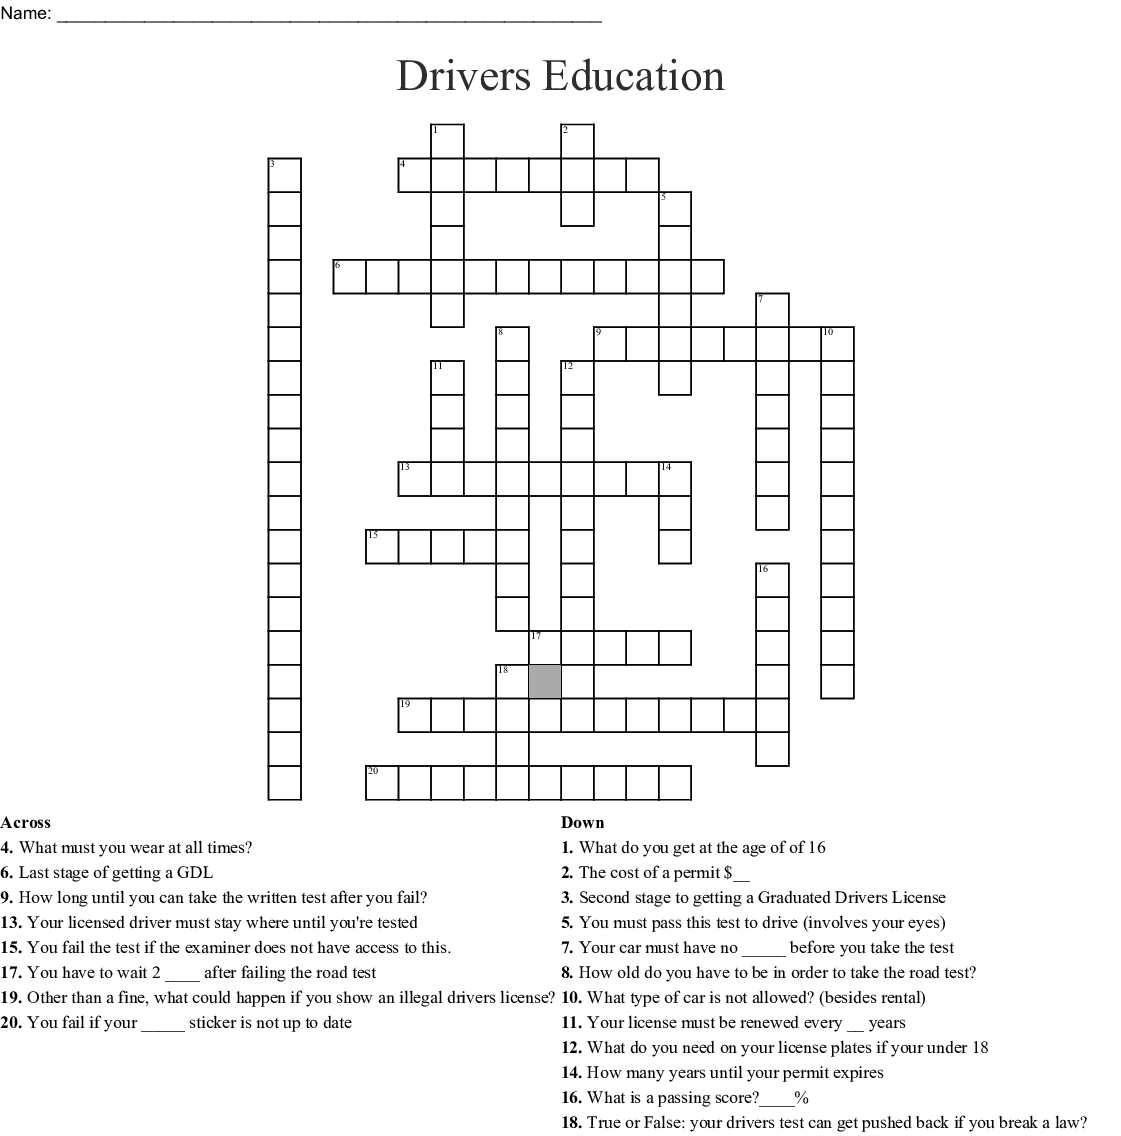 chapter-2-drivers-ed-answers